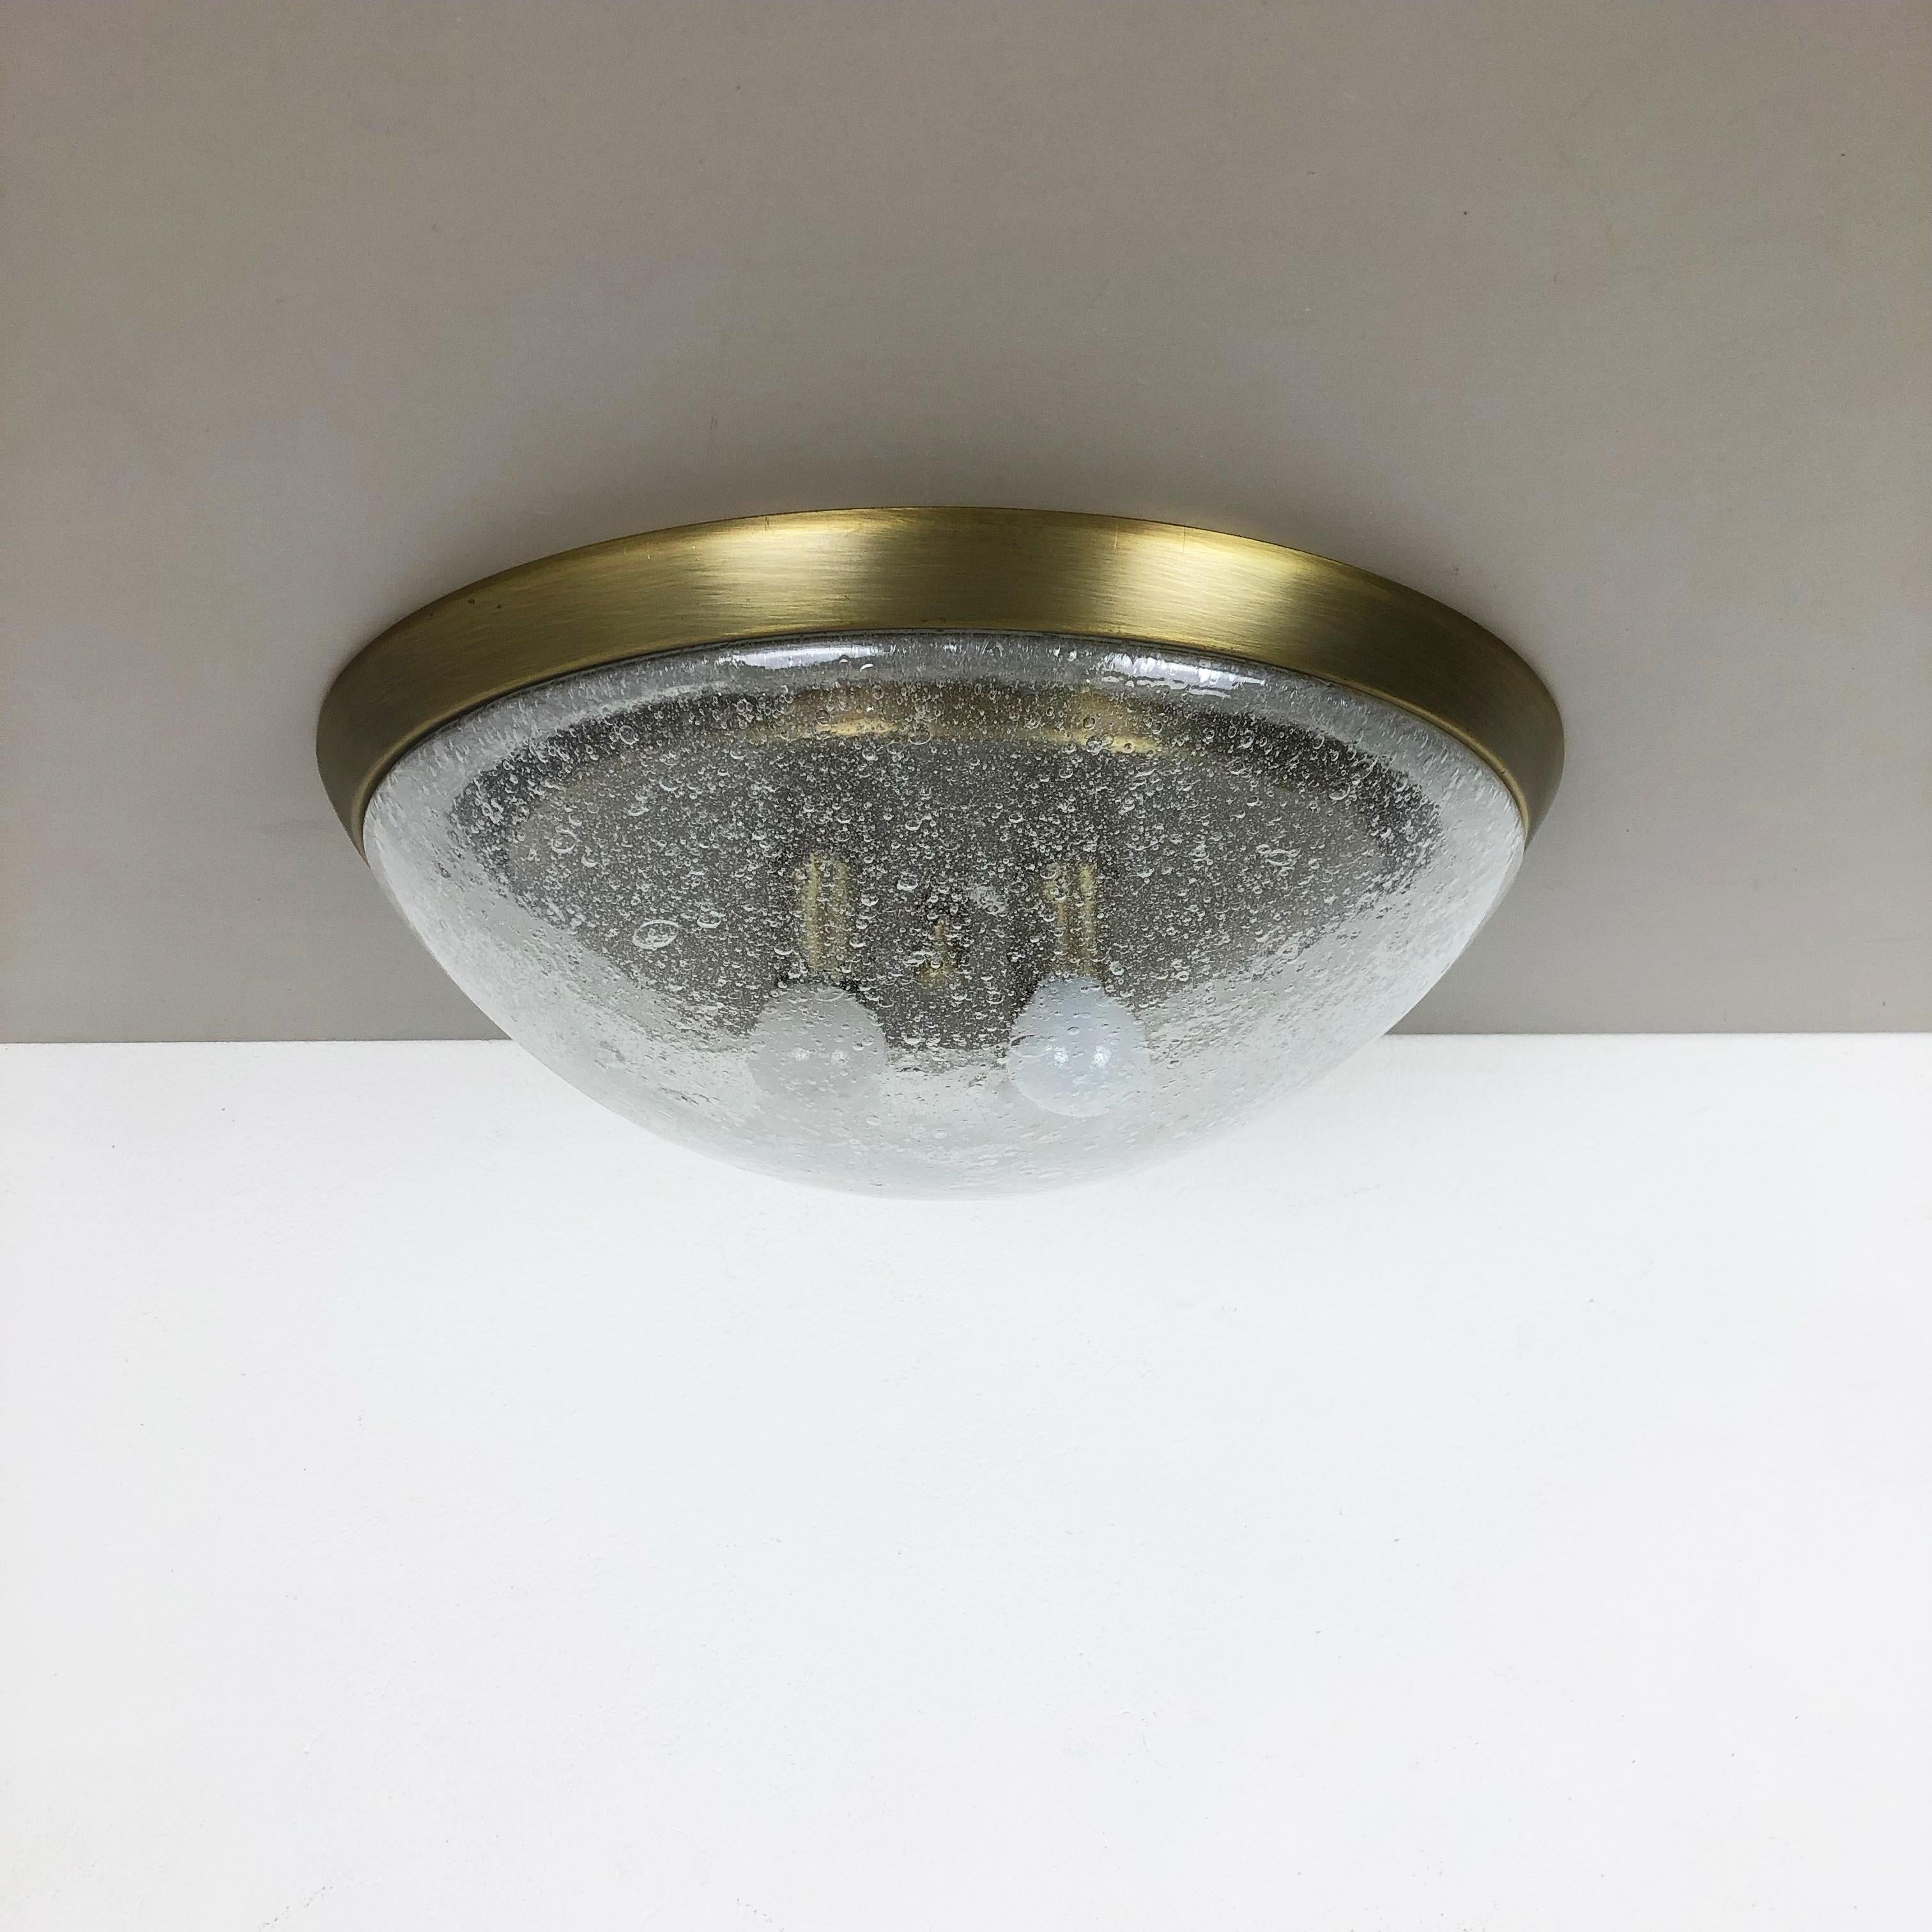 Article:

Wall light sconce or ceiling light 


Producer:

Hillebrand Leuchten, Germany



Origin:

Germany



Age:

1970s



Original modernist German wall or ceiling light made of high quality glass in cone form and clear